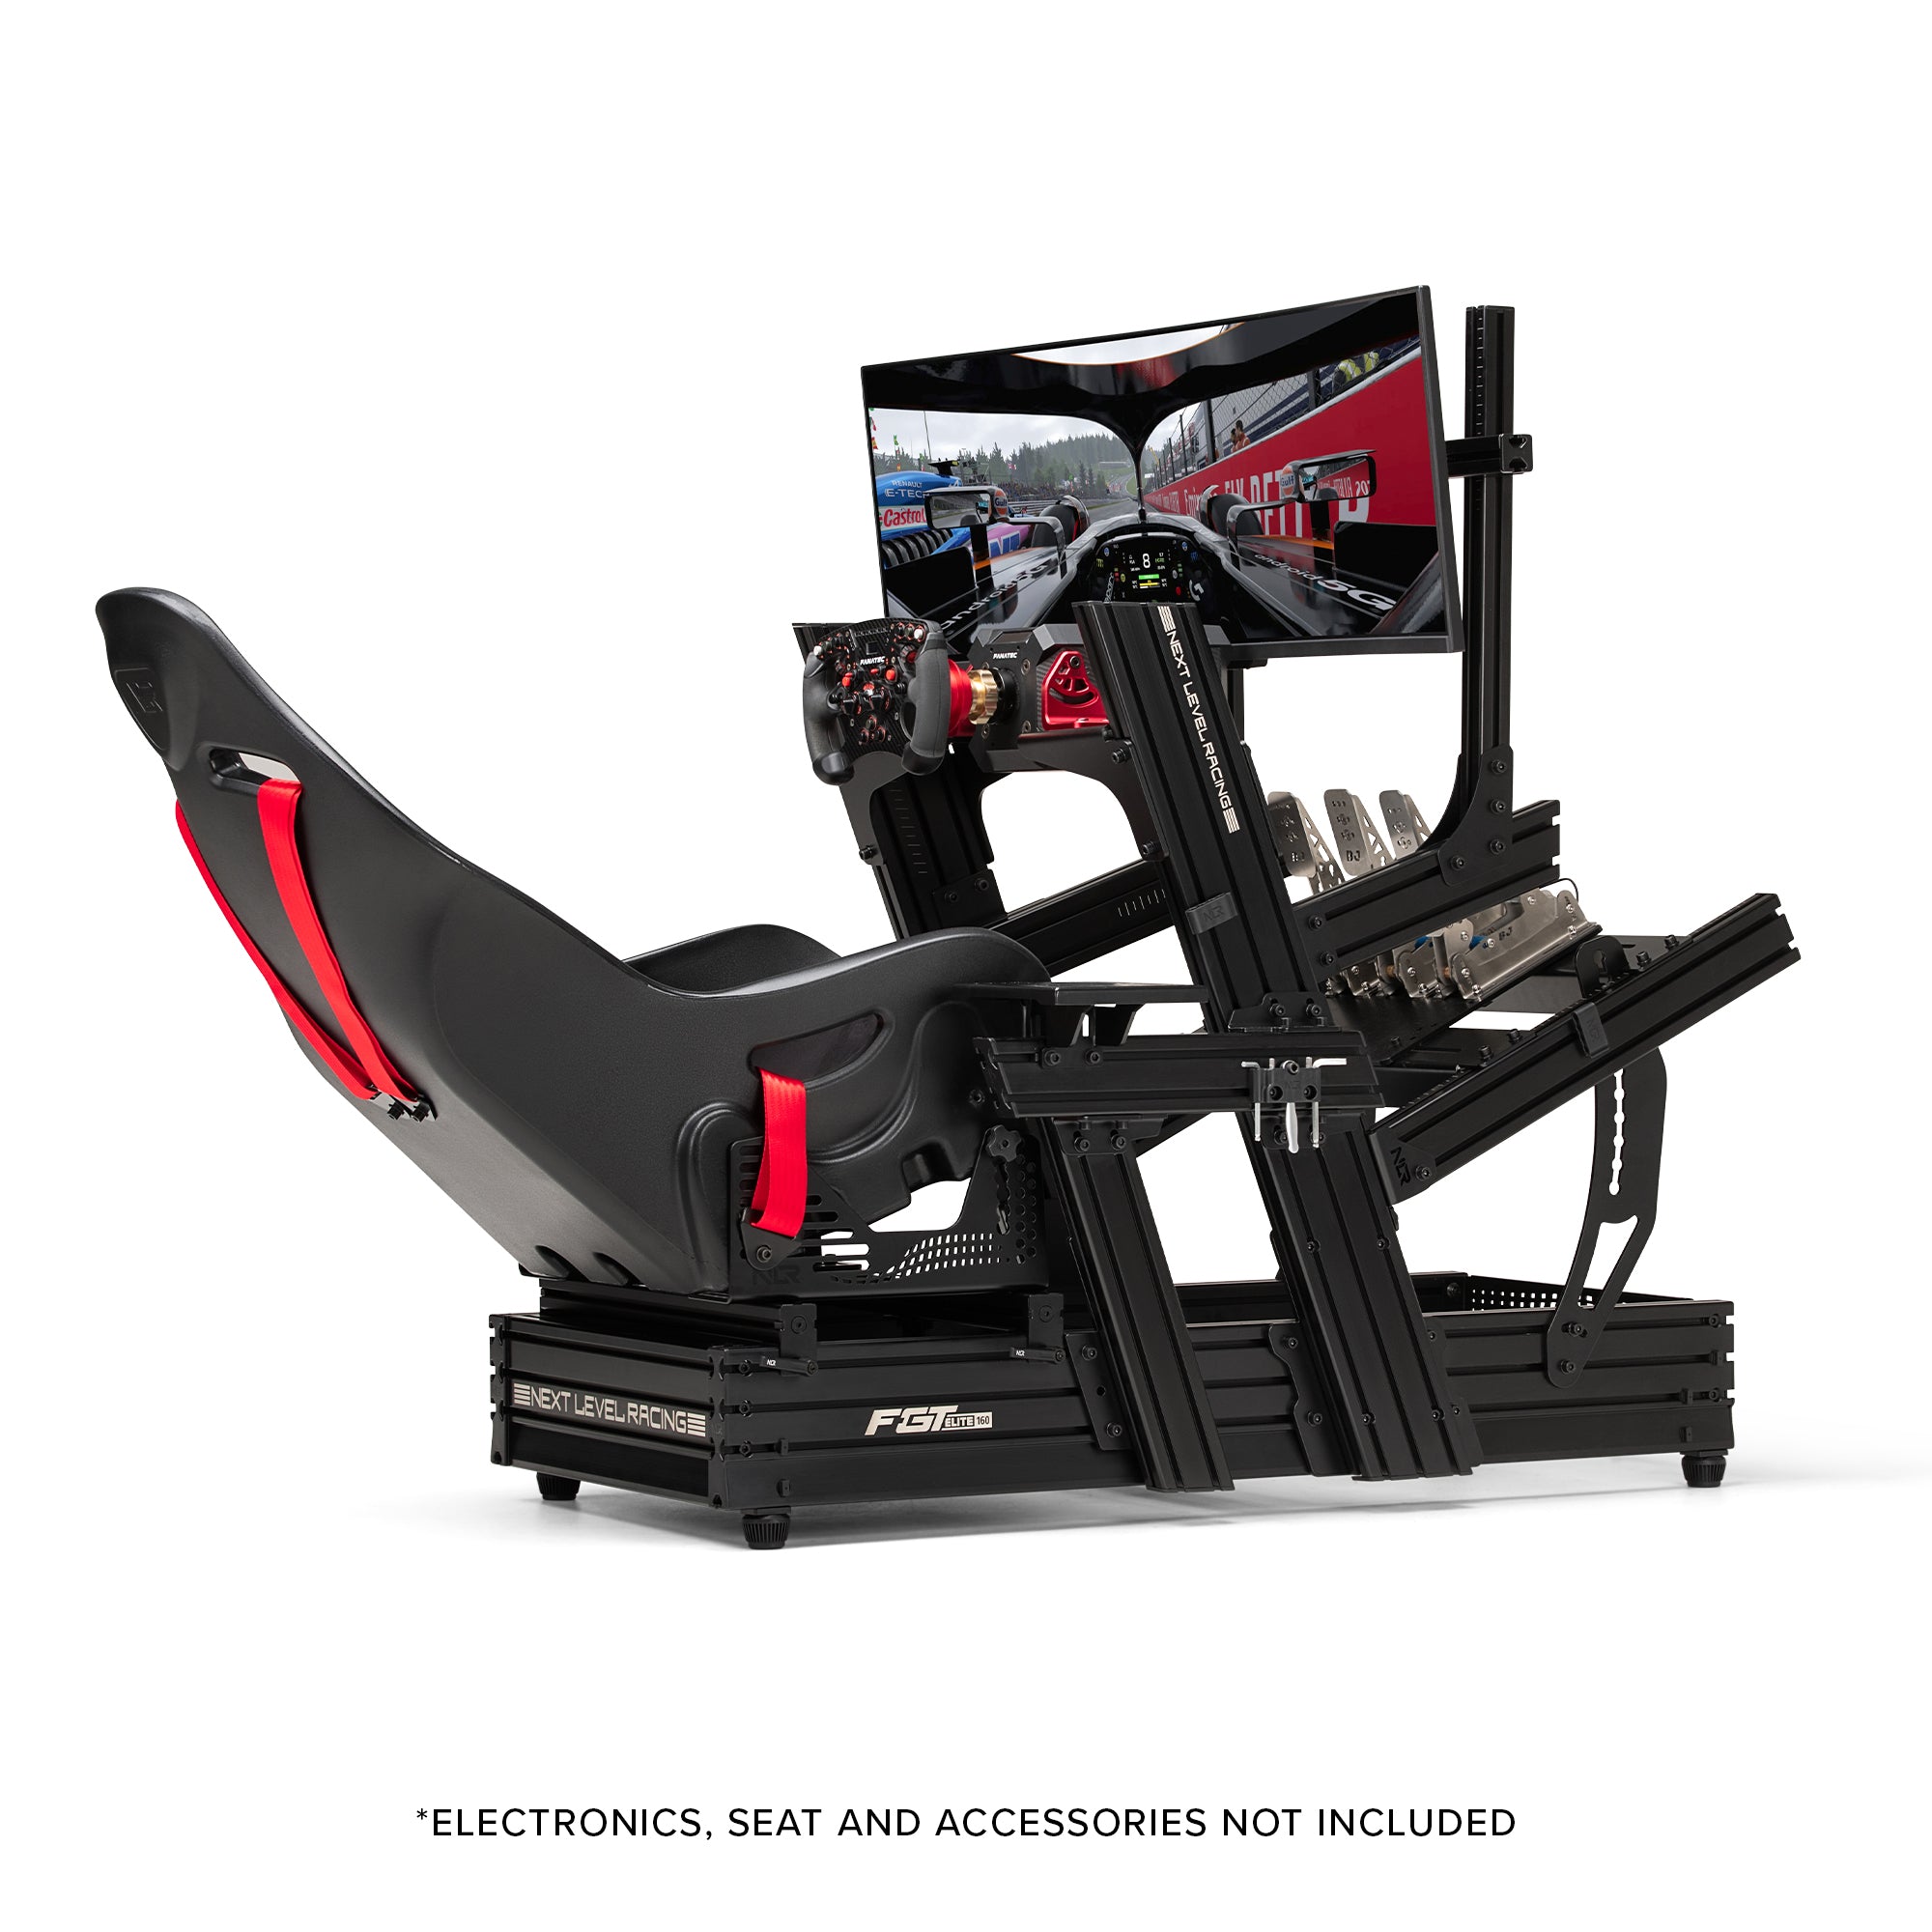 Elite Tablet/Button Box Mount Add-On - Next Level Racing